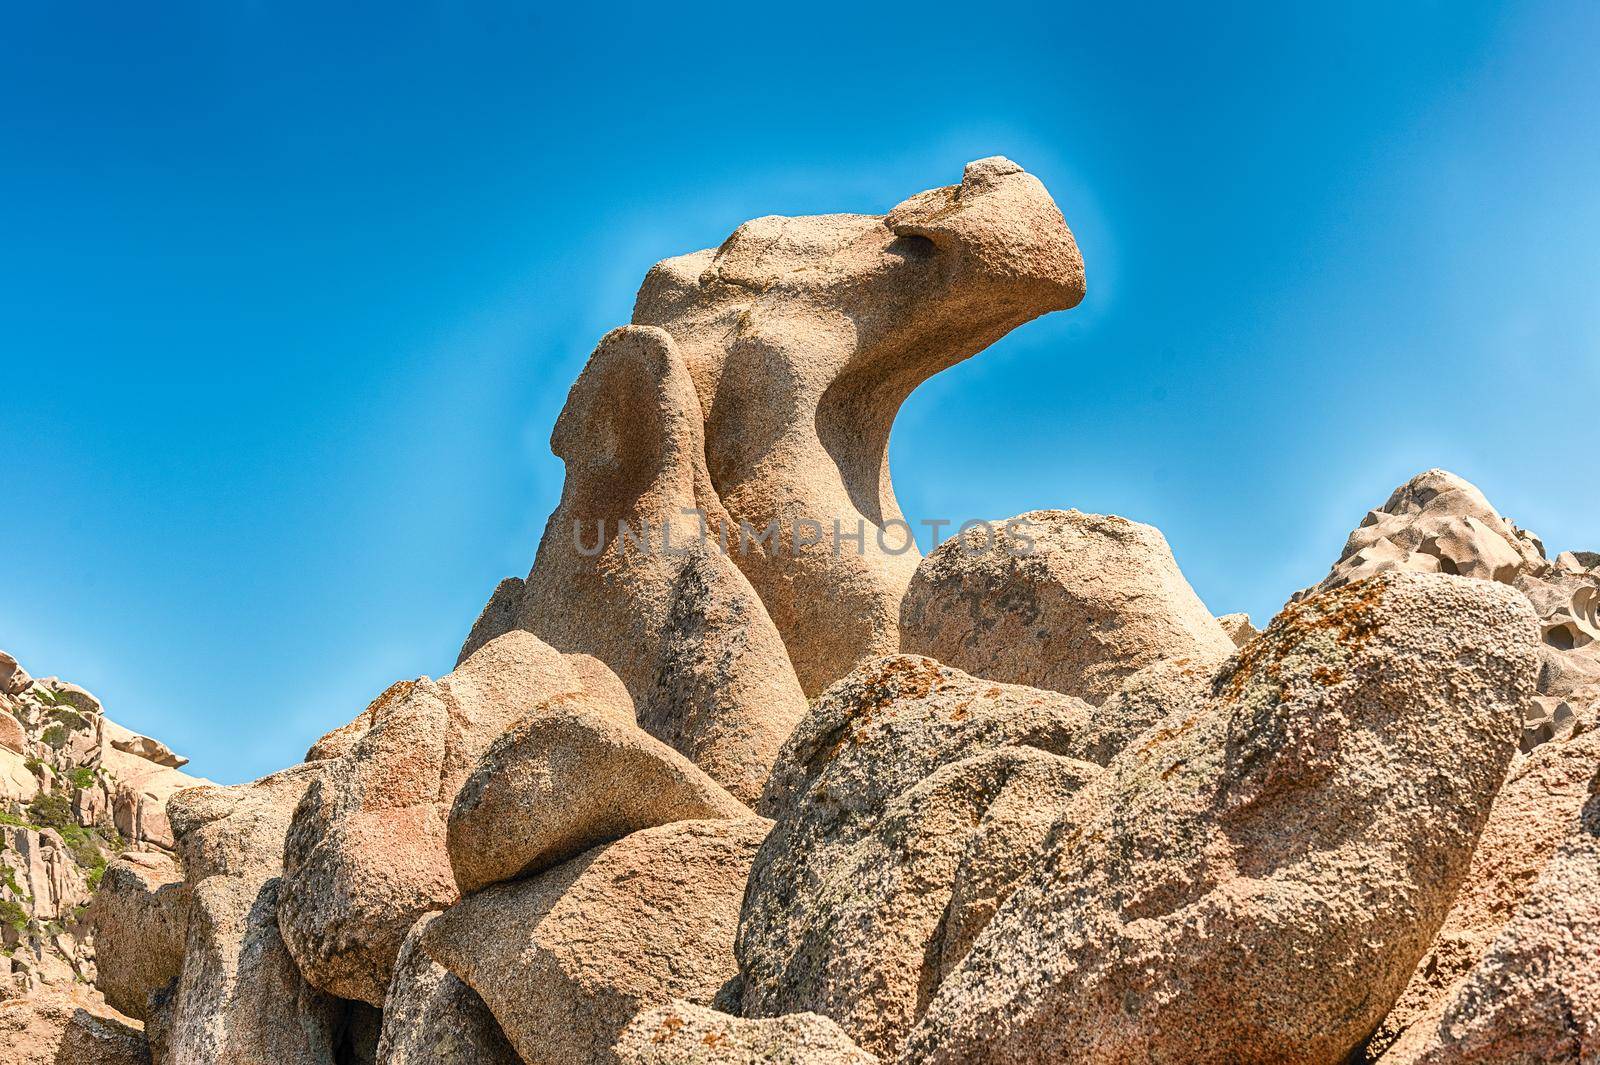 Dragon shaped rock in a place called Moon Valley (or Valle della Luna), beach dotted with granite rocks and caves in Capo Testa, Sardinia, Italy